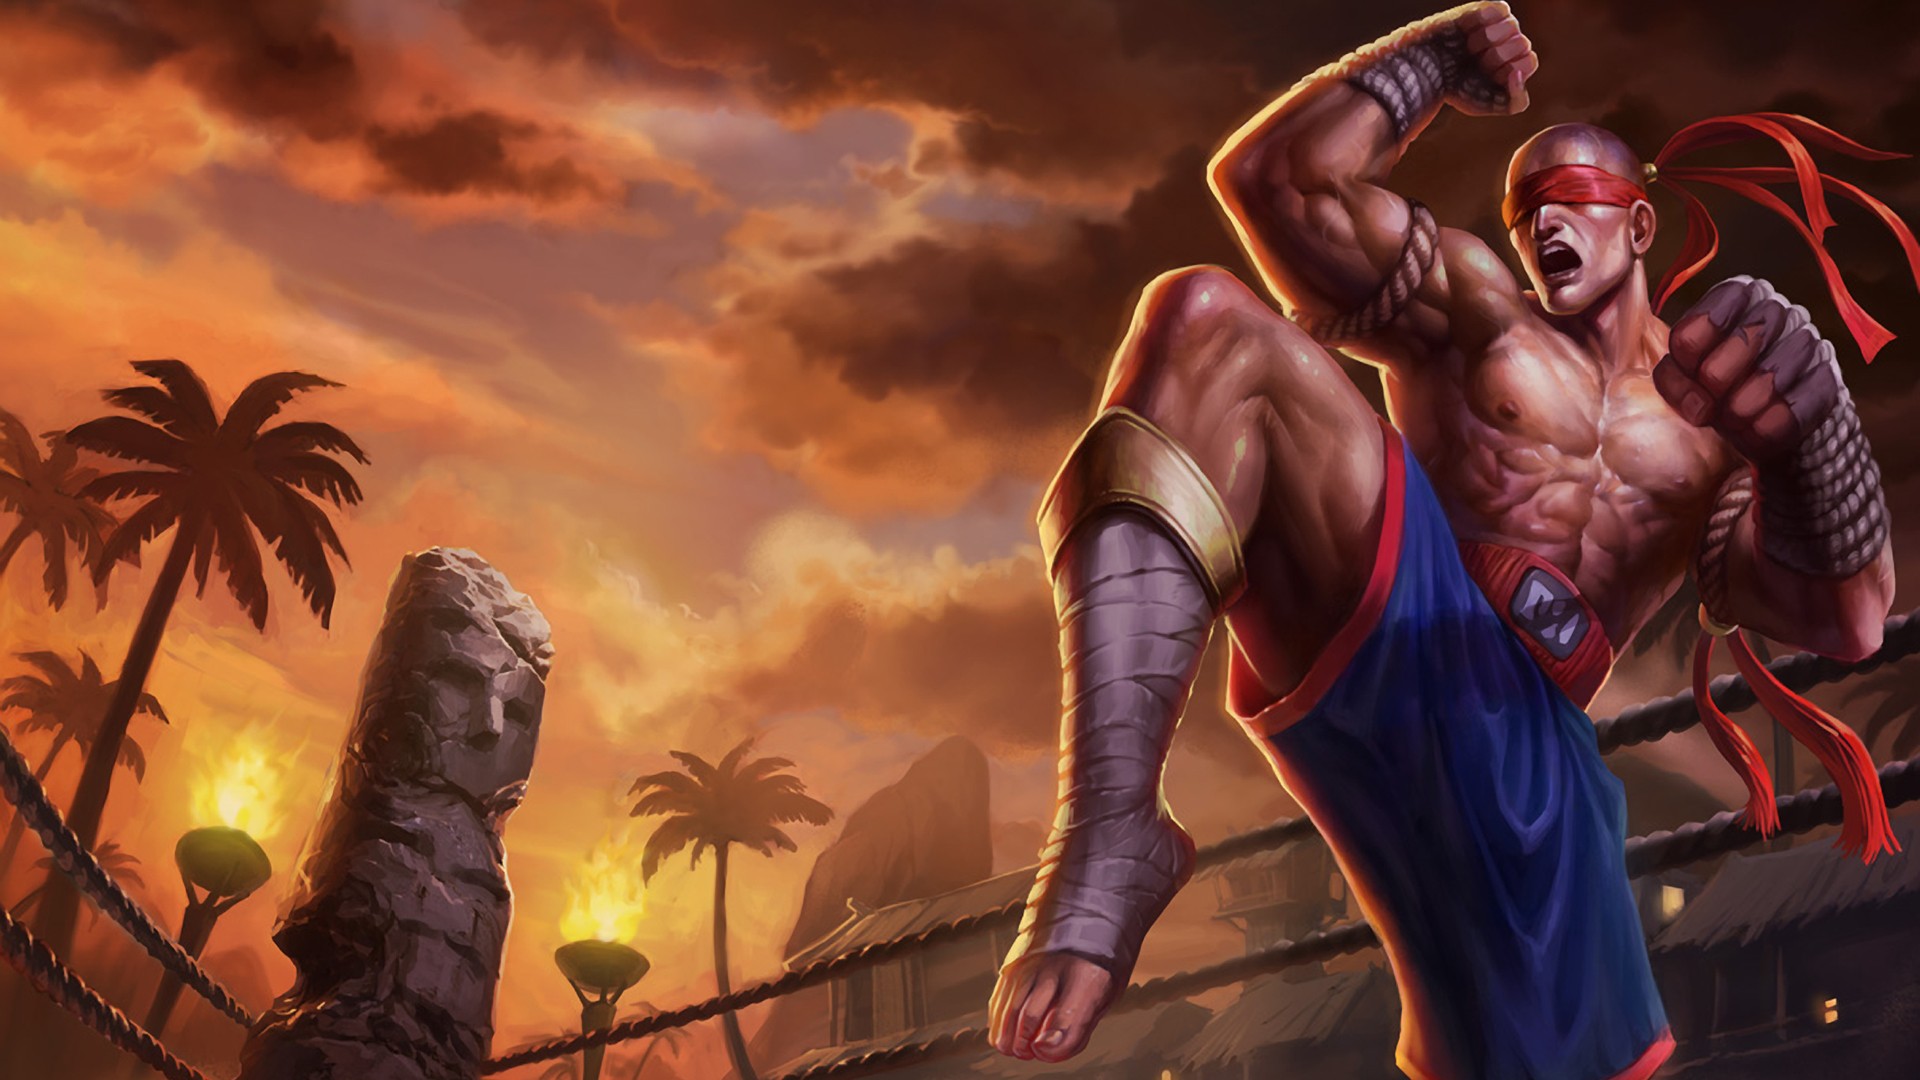 General 1920x1080 Lee Sin (League of Legends) video game warriors PC gaming muscles open mouth orange sky video game men video game art